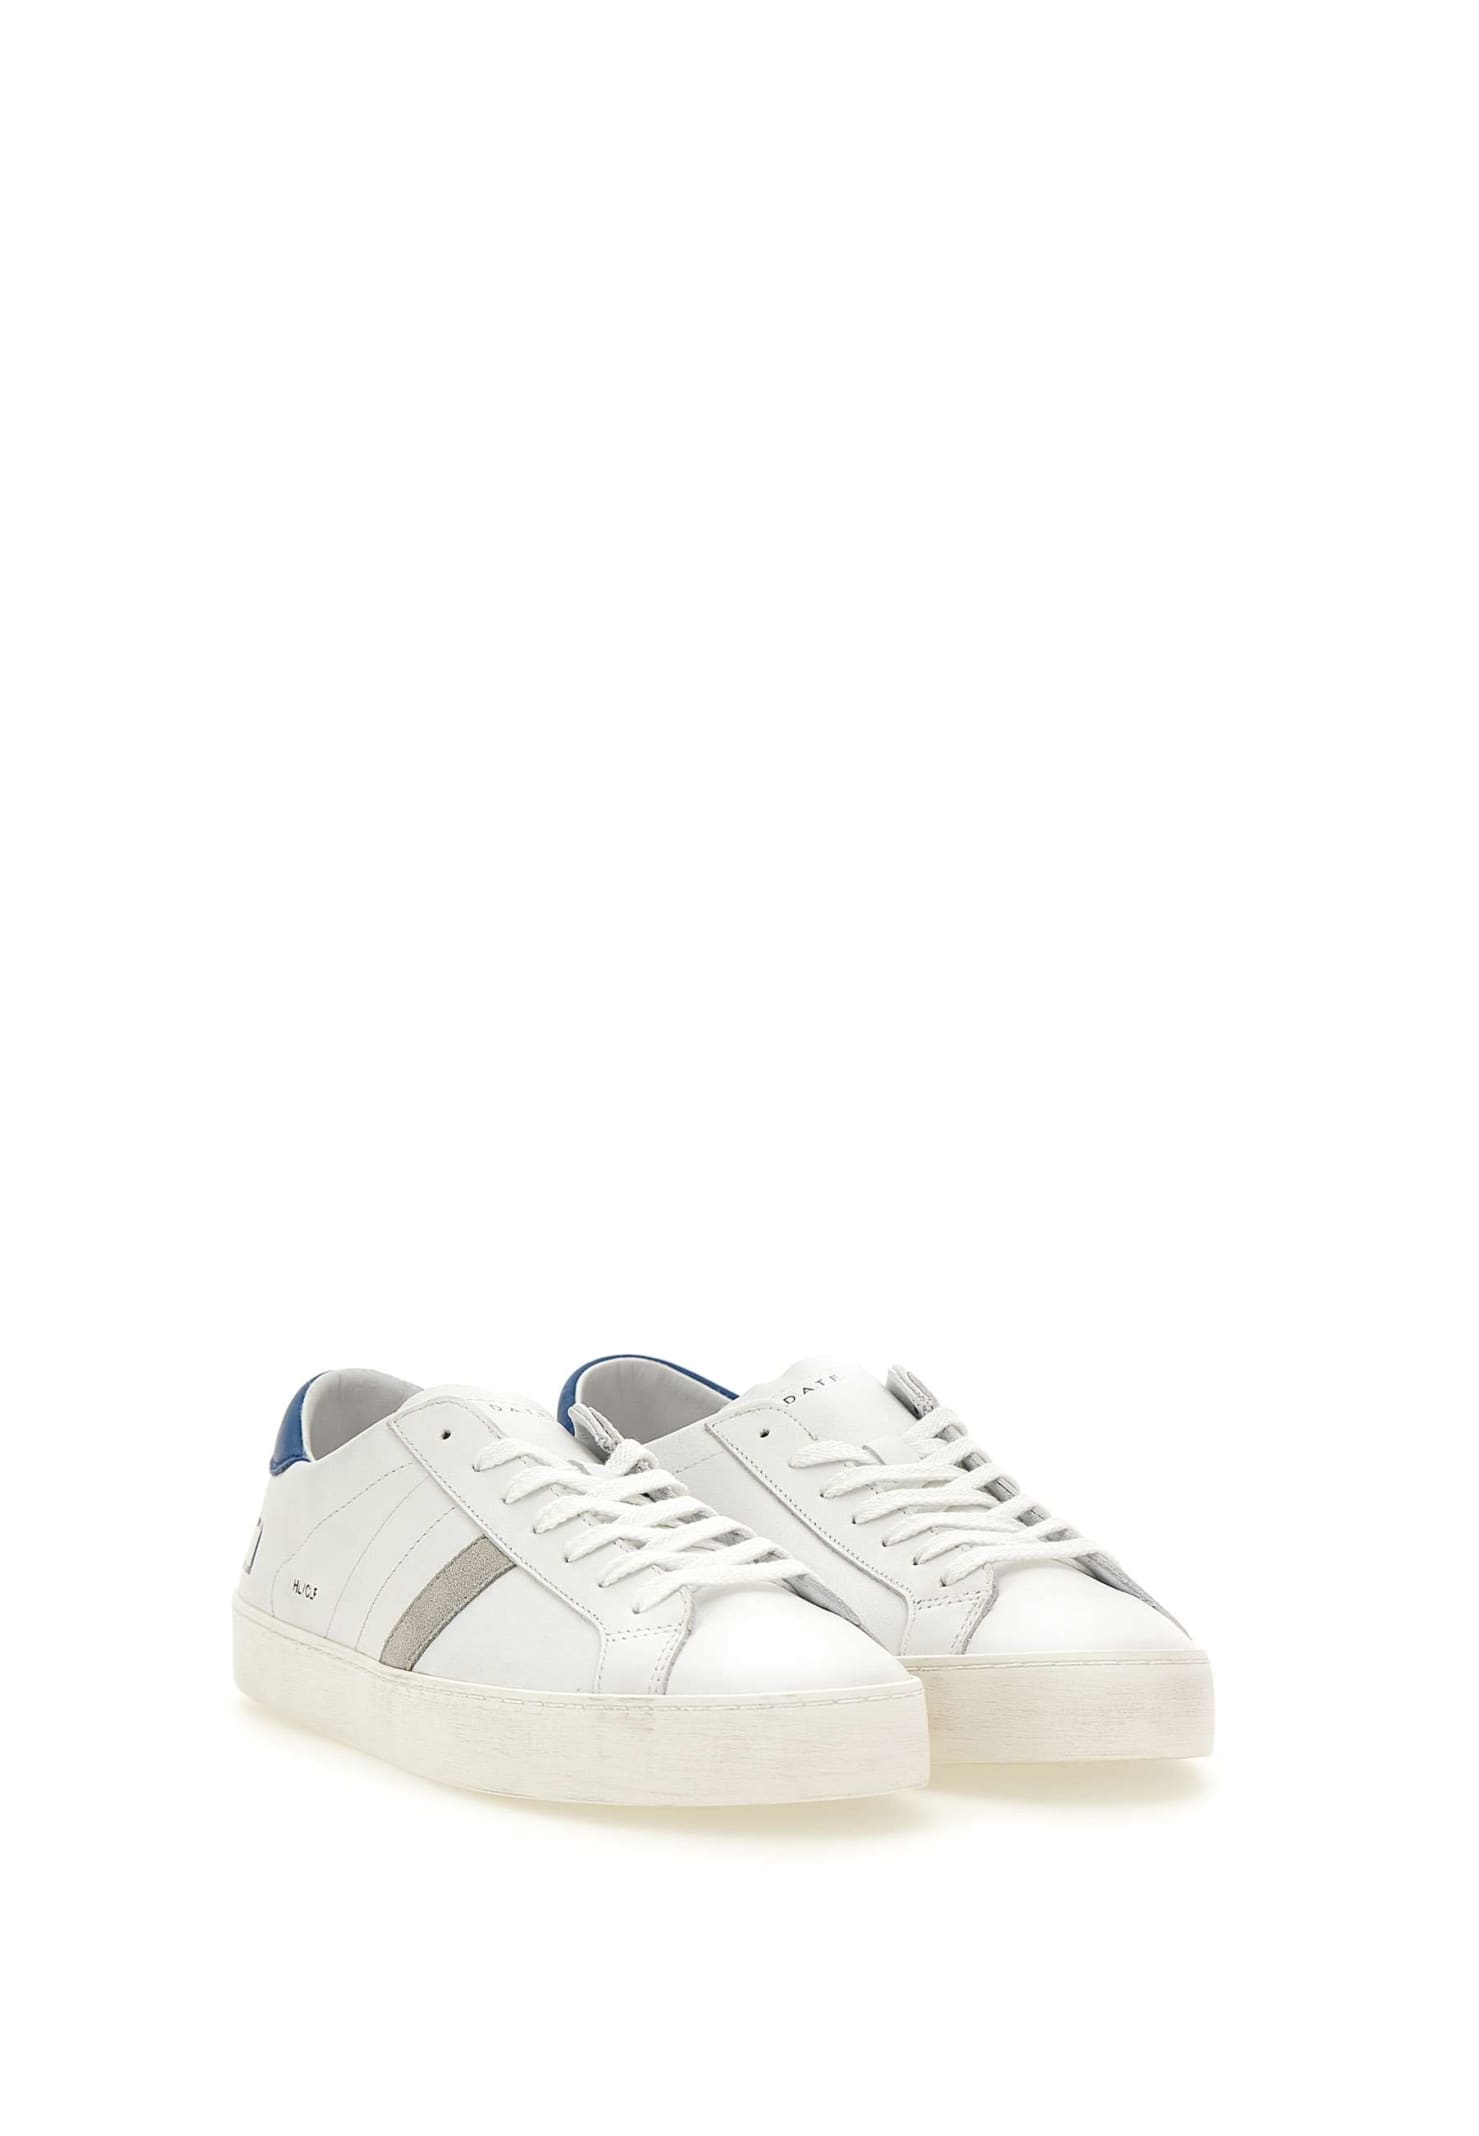 Shop Date Hillow Calf Leather Sneakers In White